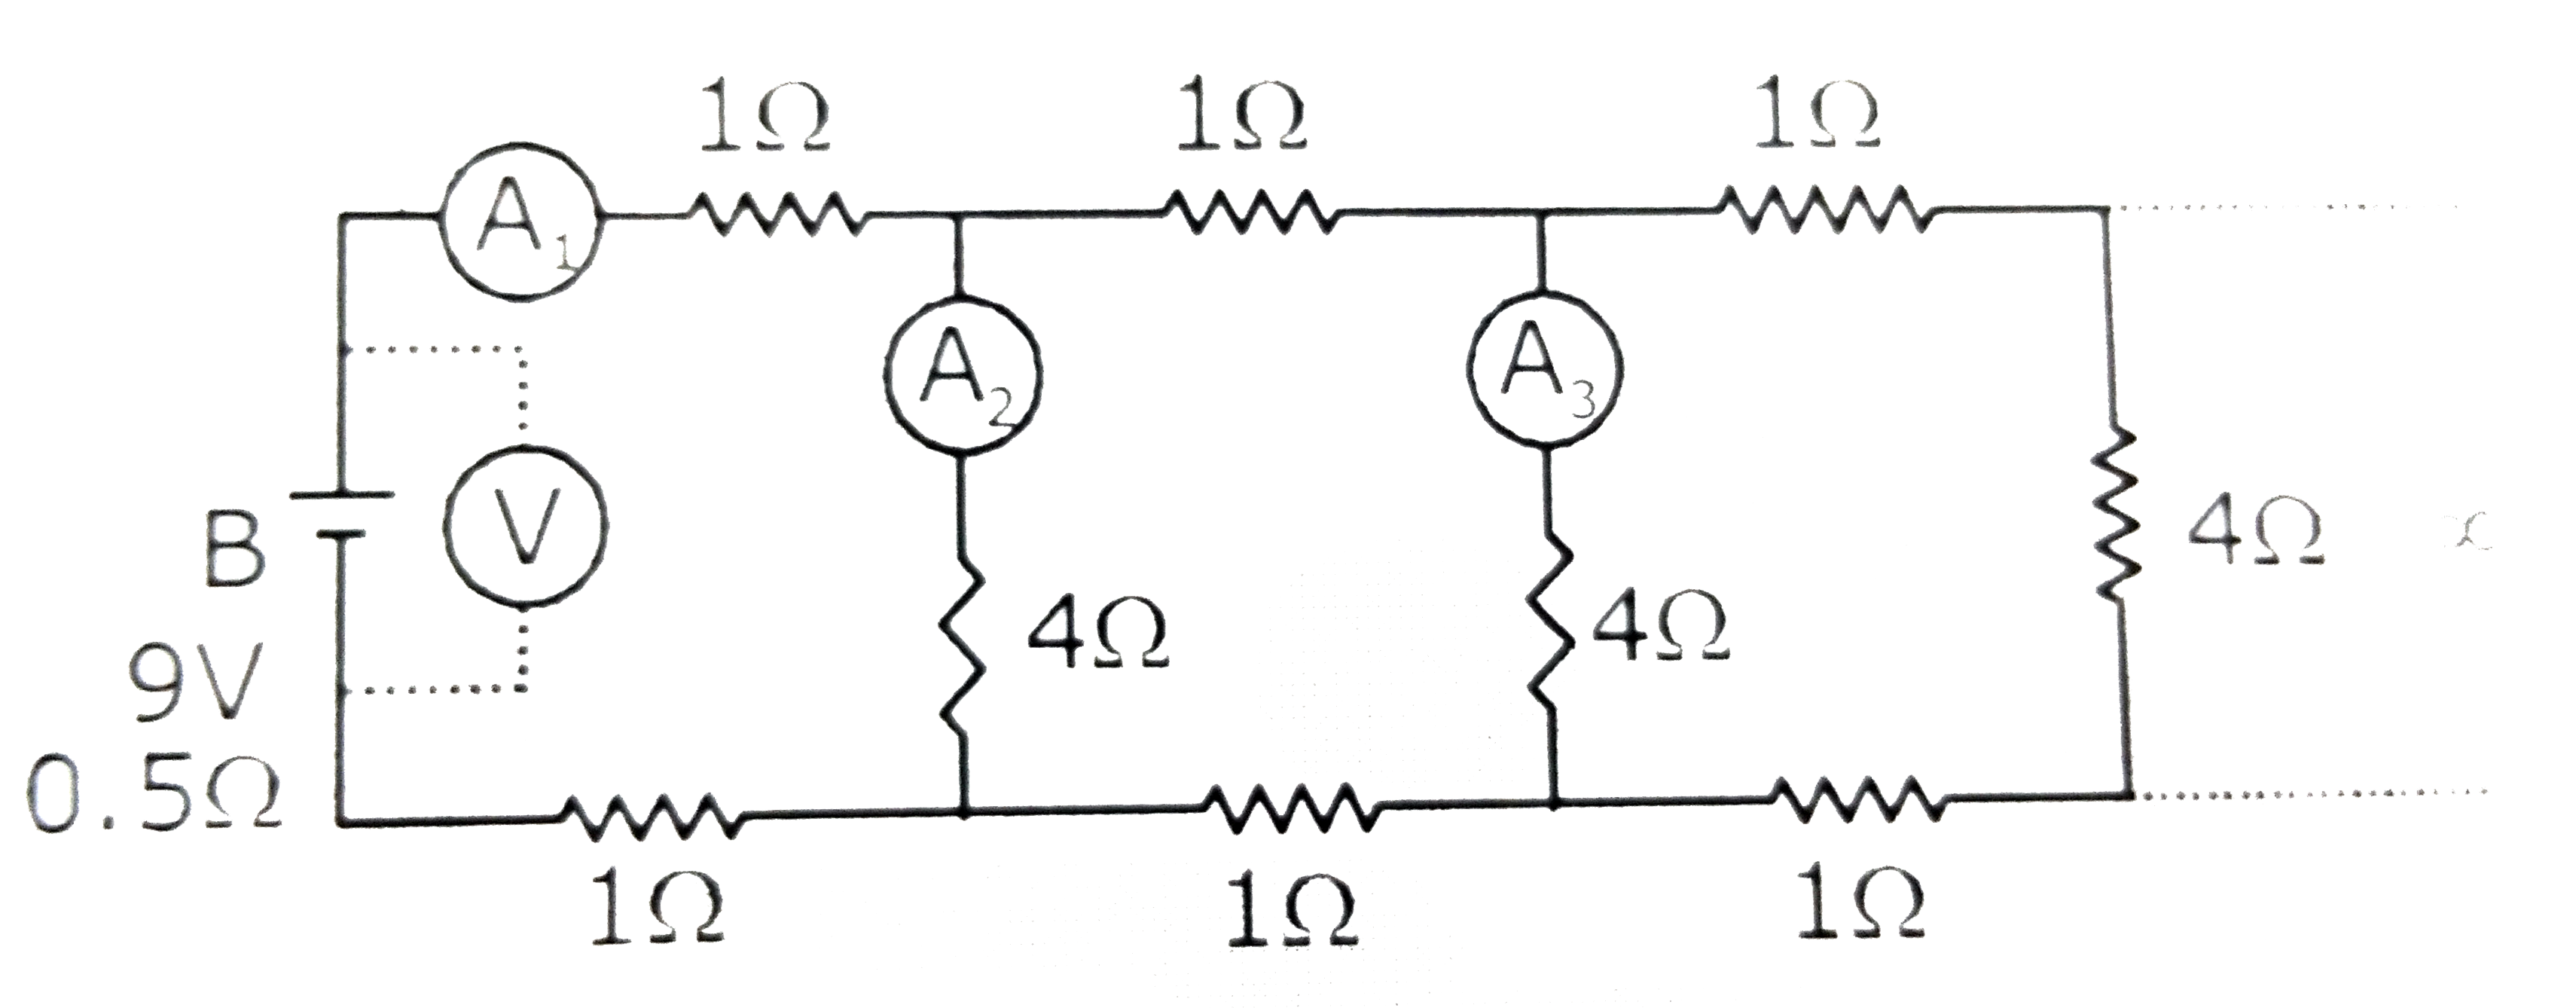 A 9 V battery with internal resistance of 0.5 Omega  is connected across an infinite network as shown in the figure. All ammeters A(1), A(2), A(3)  and voltmeter V are ideal.